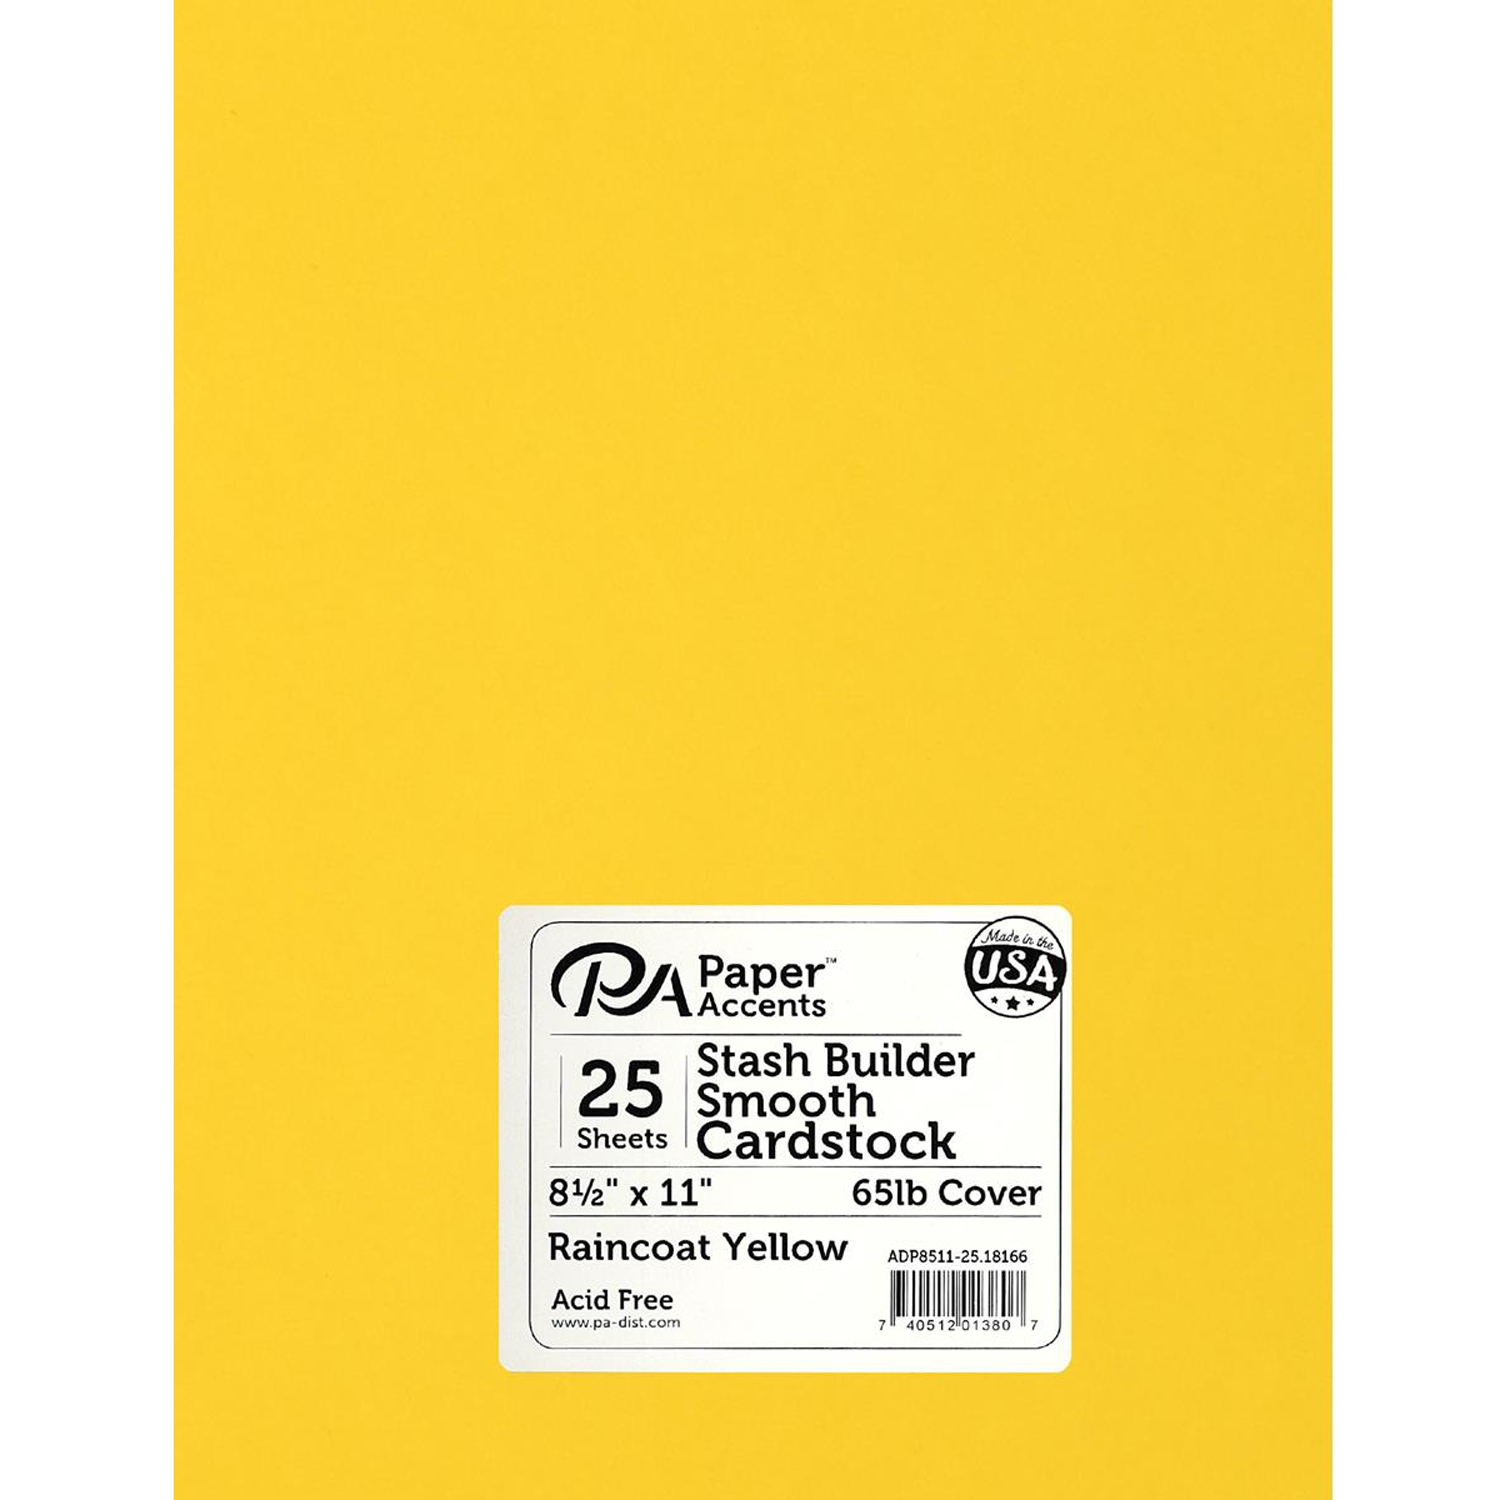 PA Paper Accents Stash Builder Cardstock 8.5 x 11 Raincoat Yellow, 65lb  colored cardstock paper for card making, scrapbooking, printing, quilling